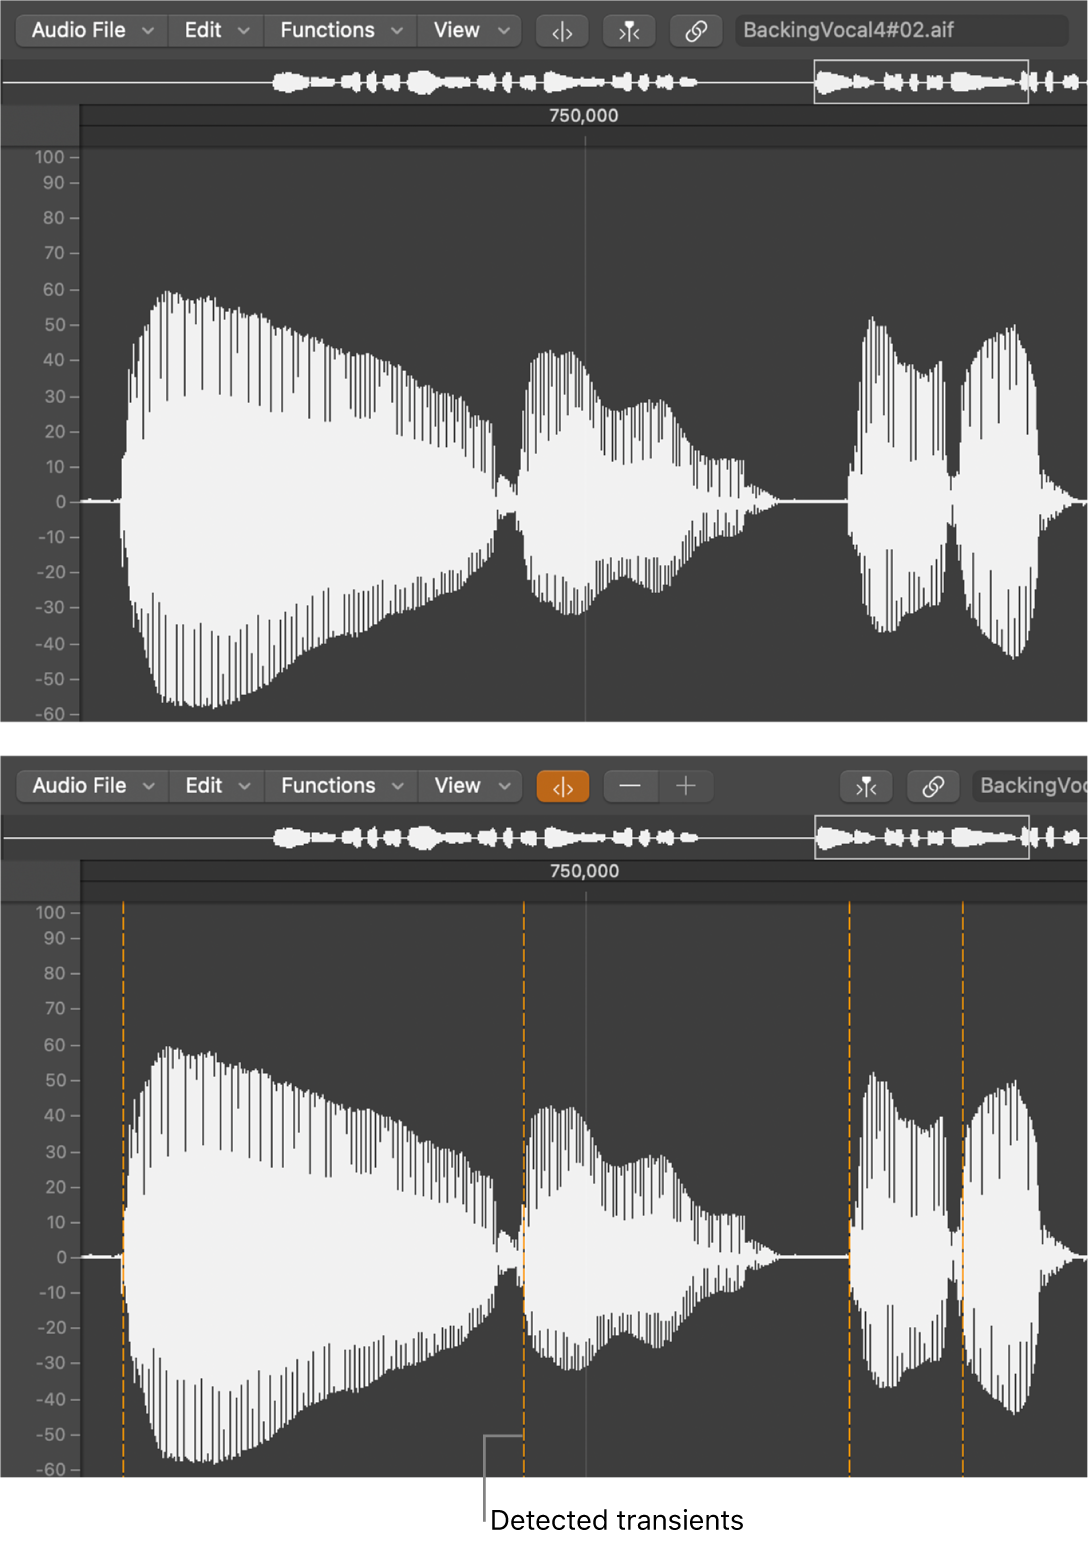 Figure. Audio region in Sample Editor, without transients and with transients.